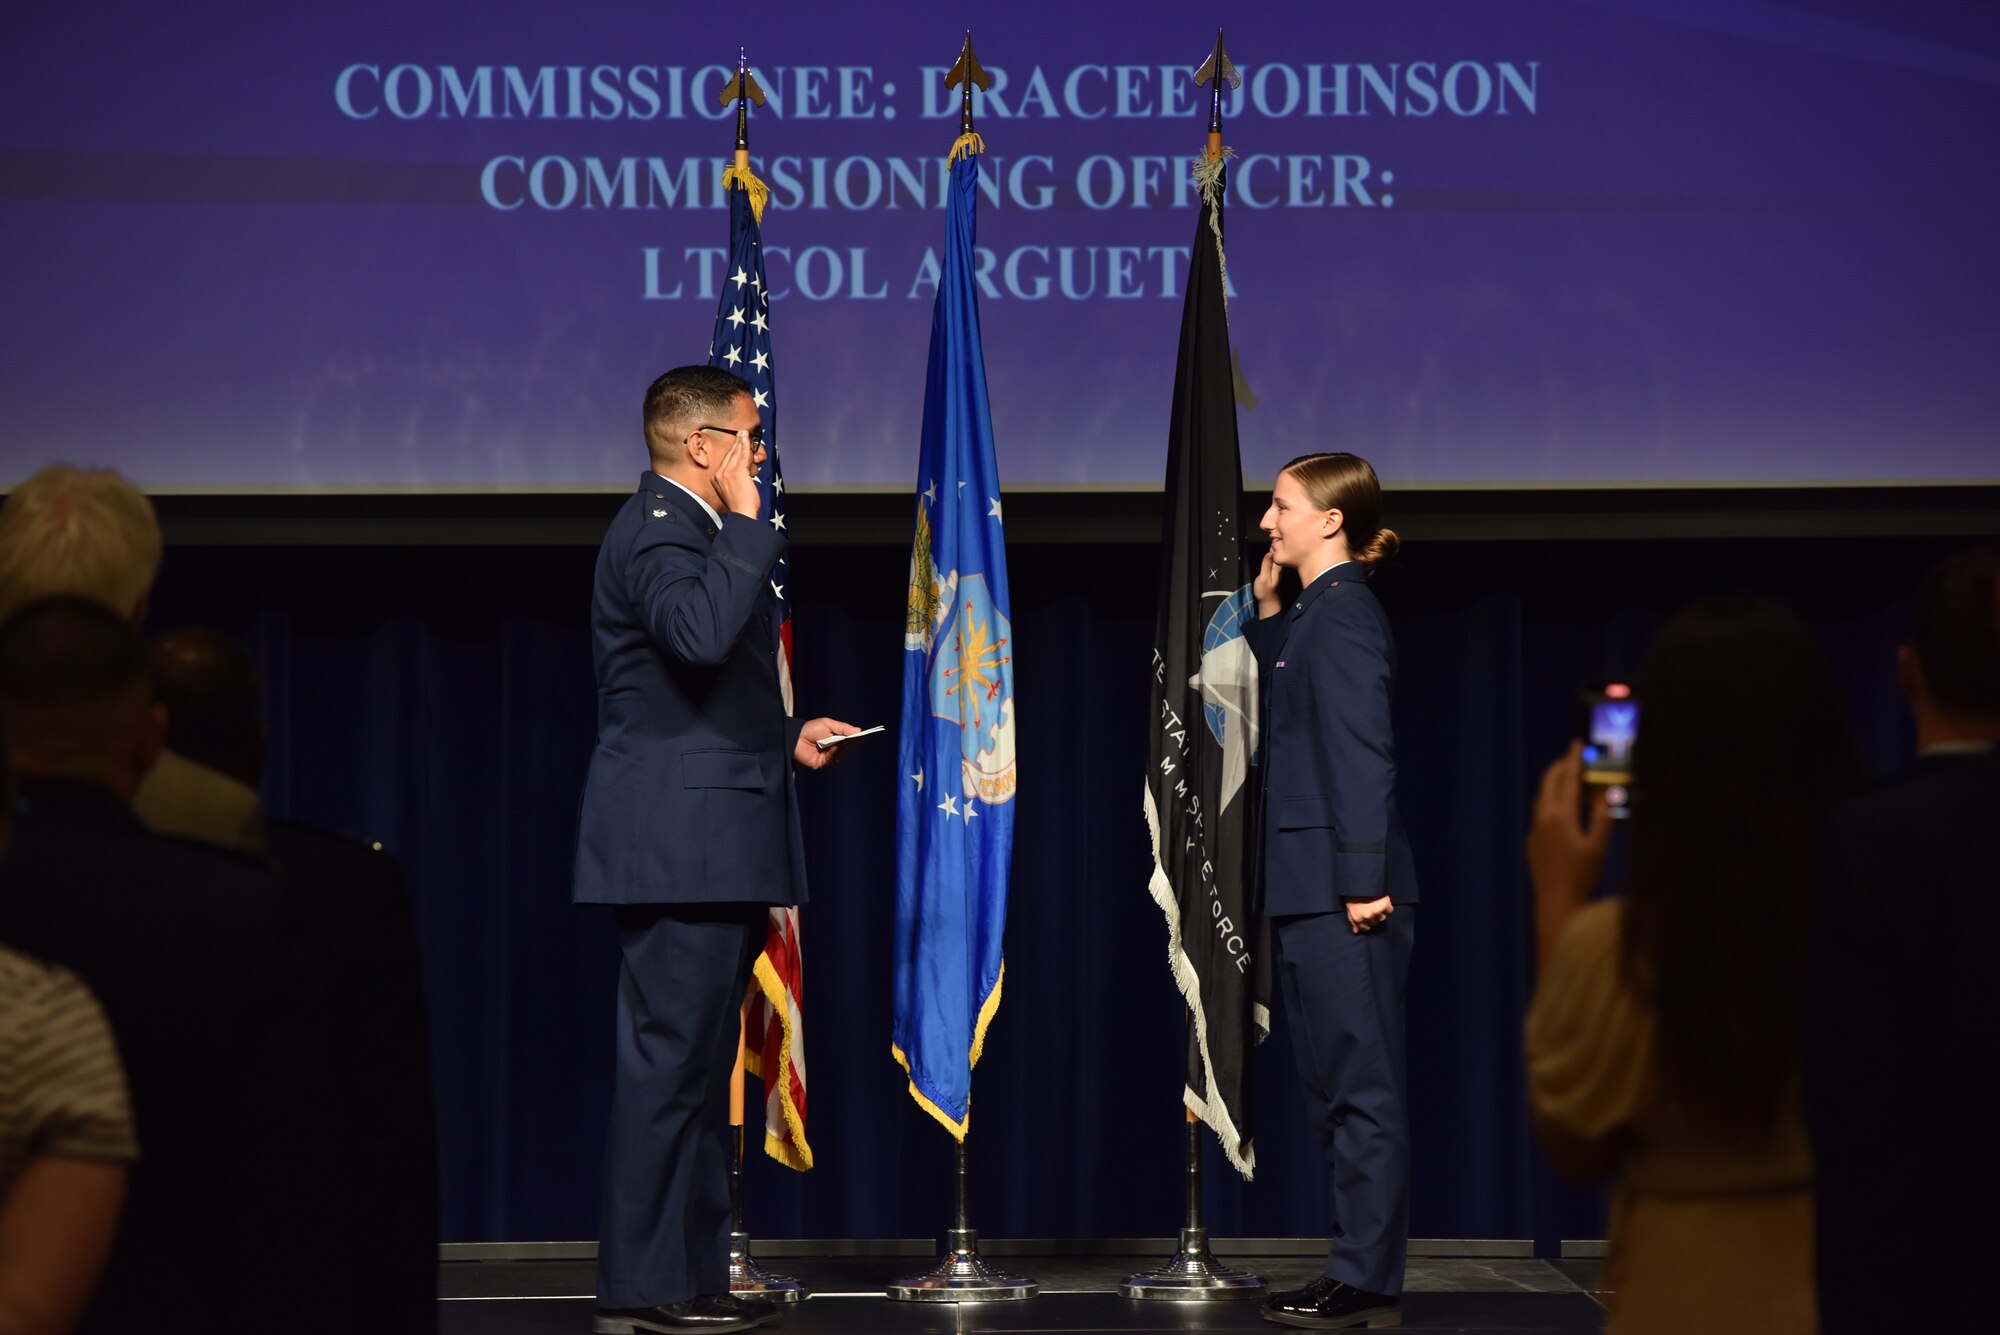 U.S. Air Force 2nd Lt. Dracee Johnson, Angelo State University graduate, takes the oath of office at Angelo State University, San Angelo, Texas, May 12, 2023. Four Angelo State University cadets were commissioned at the ceremony. (U.S. Air Force photo by Airman 1st Class Madison Collier)